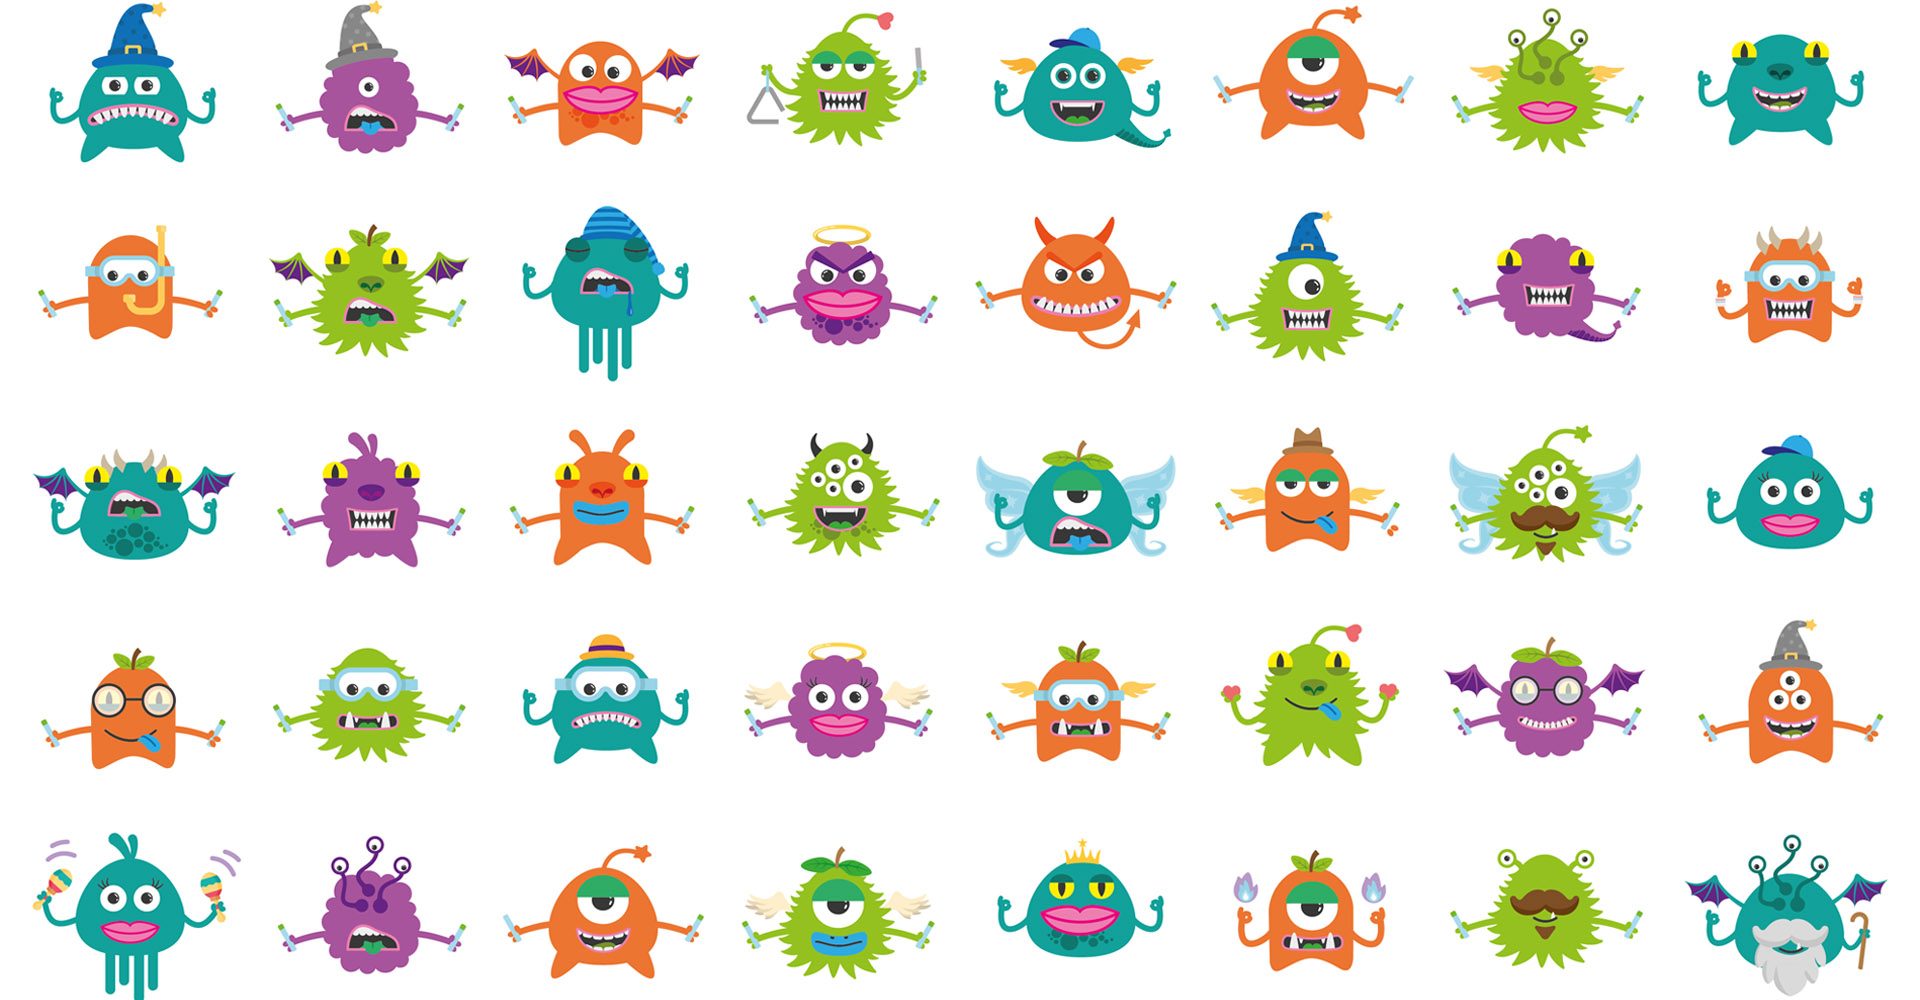 Stix_Monsters characters_Large